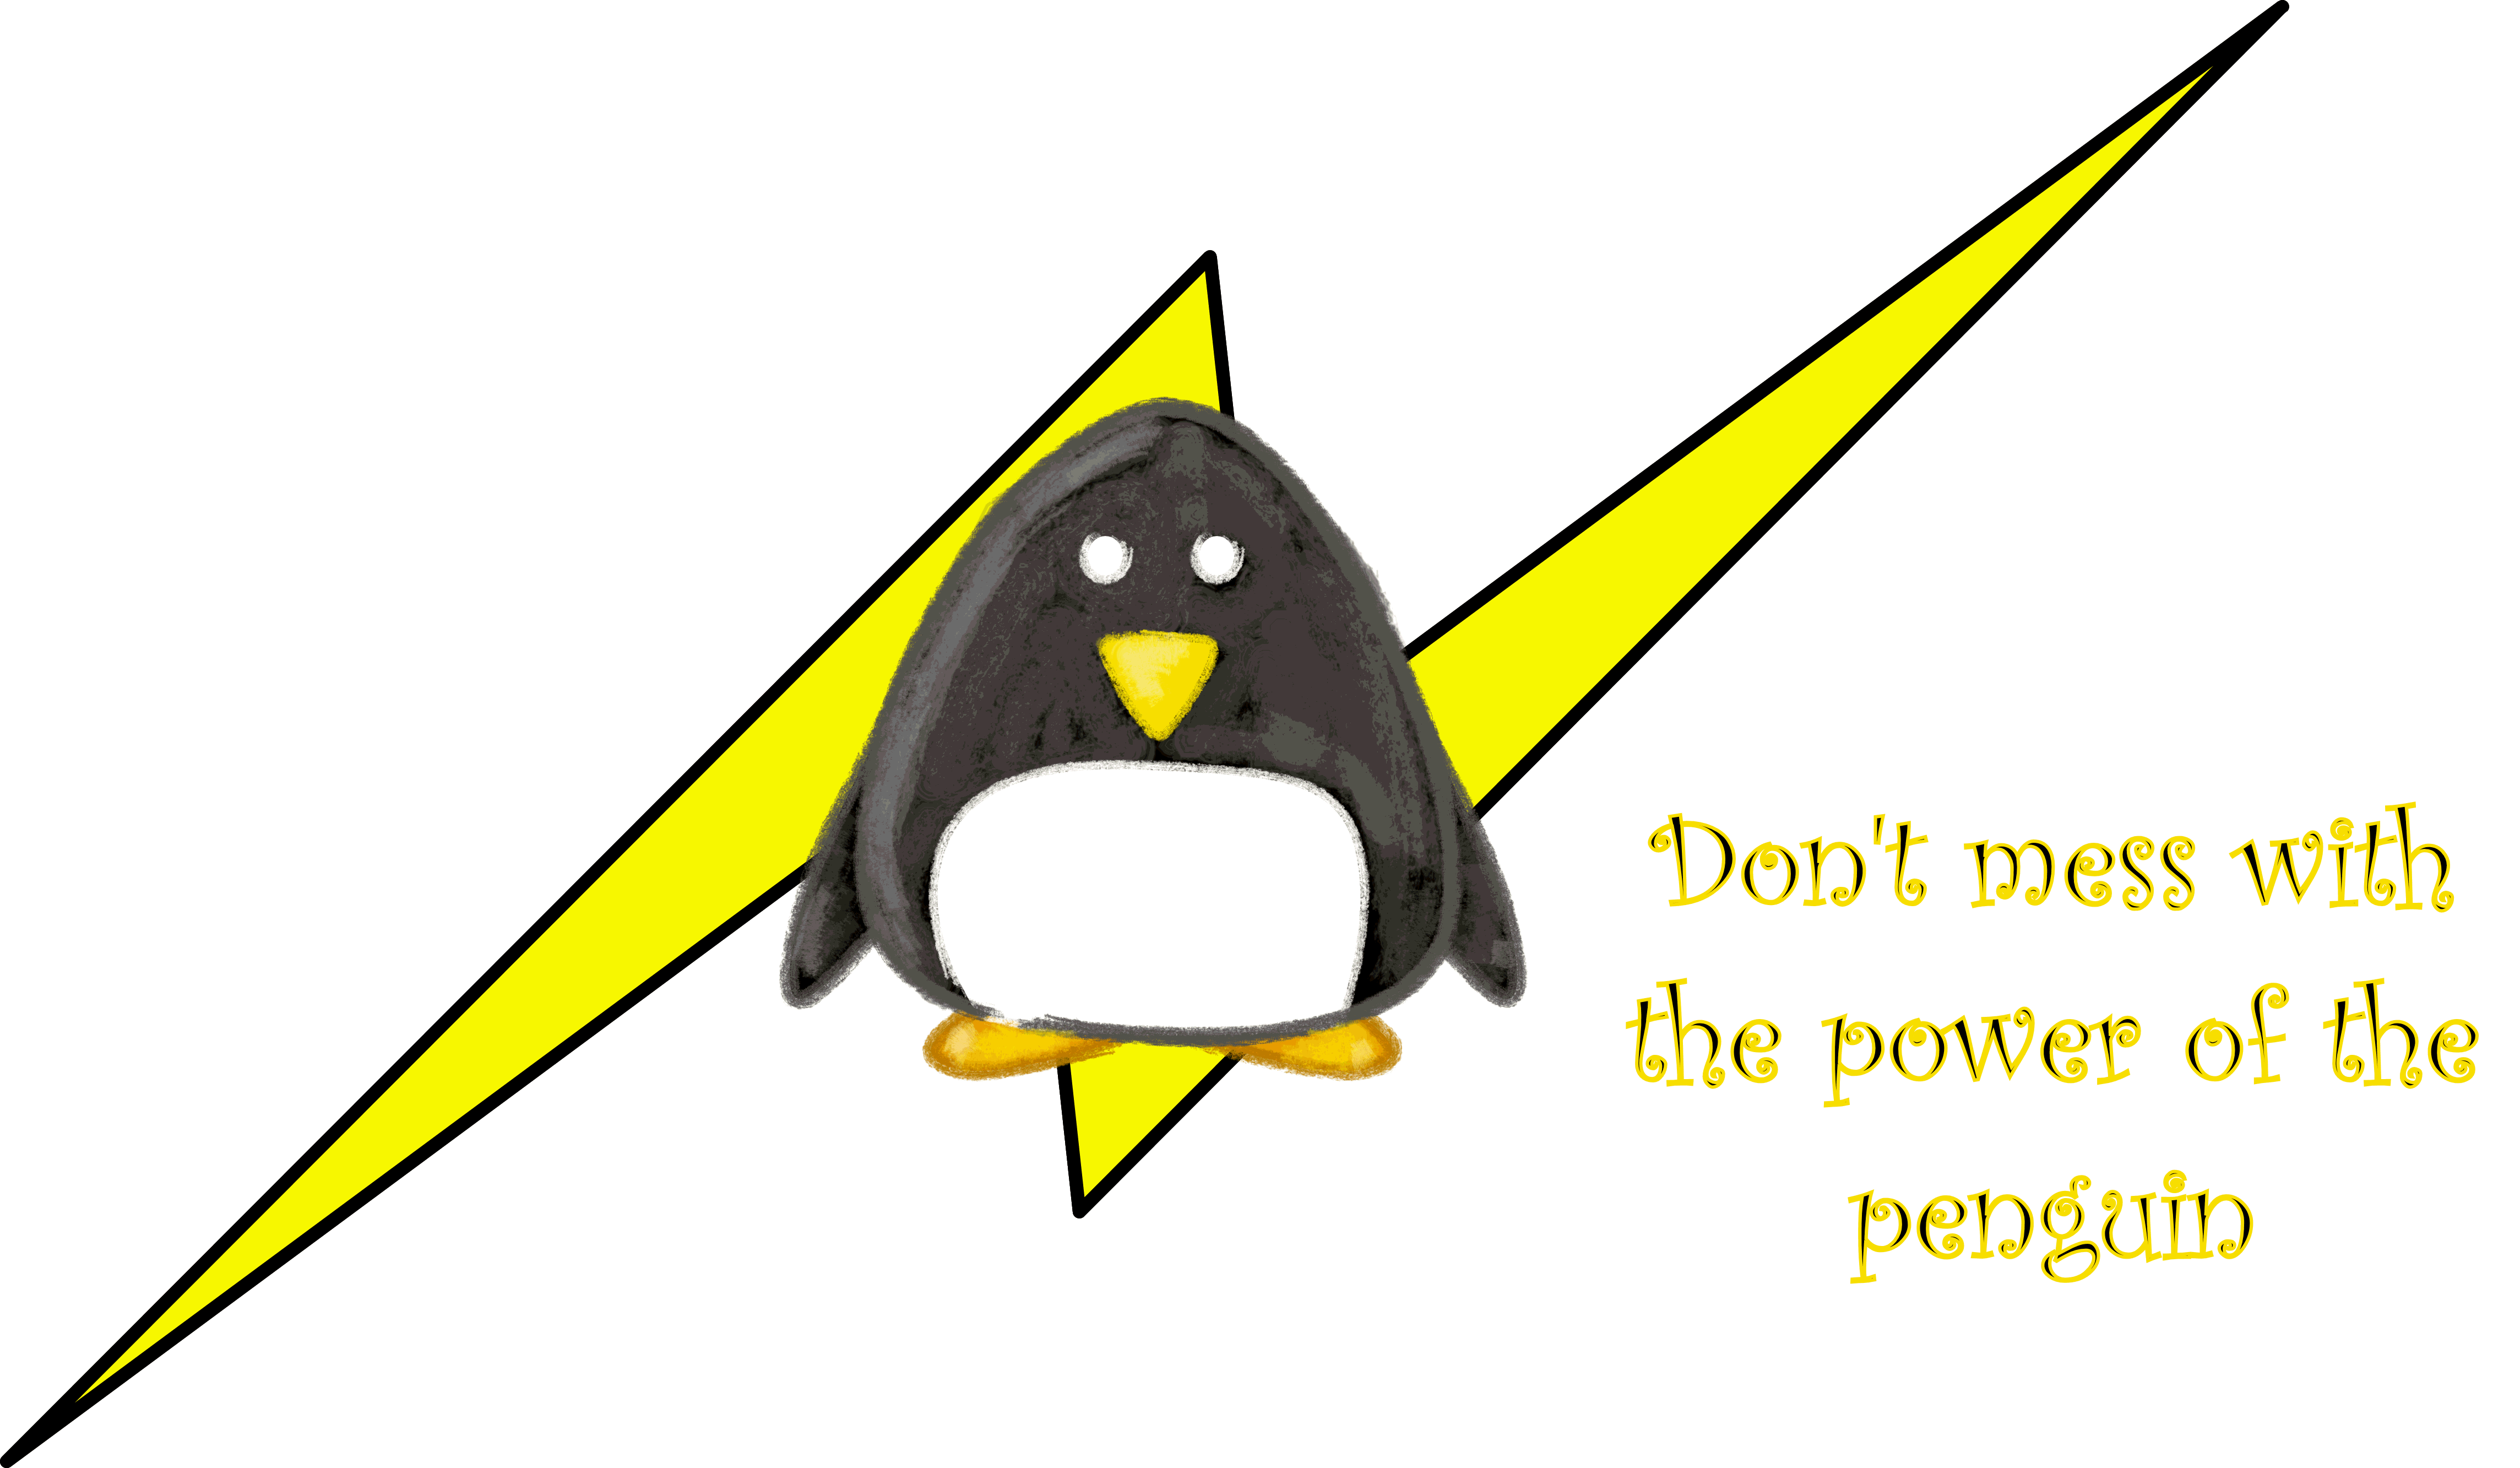 Don't mess with the power of the penguin! by Bloooo